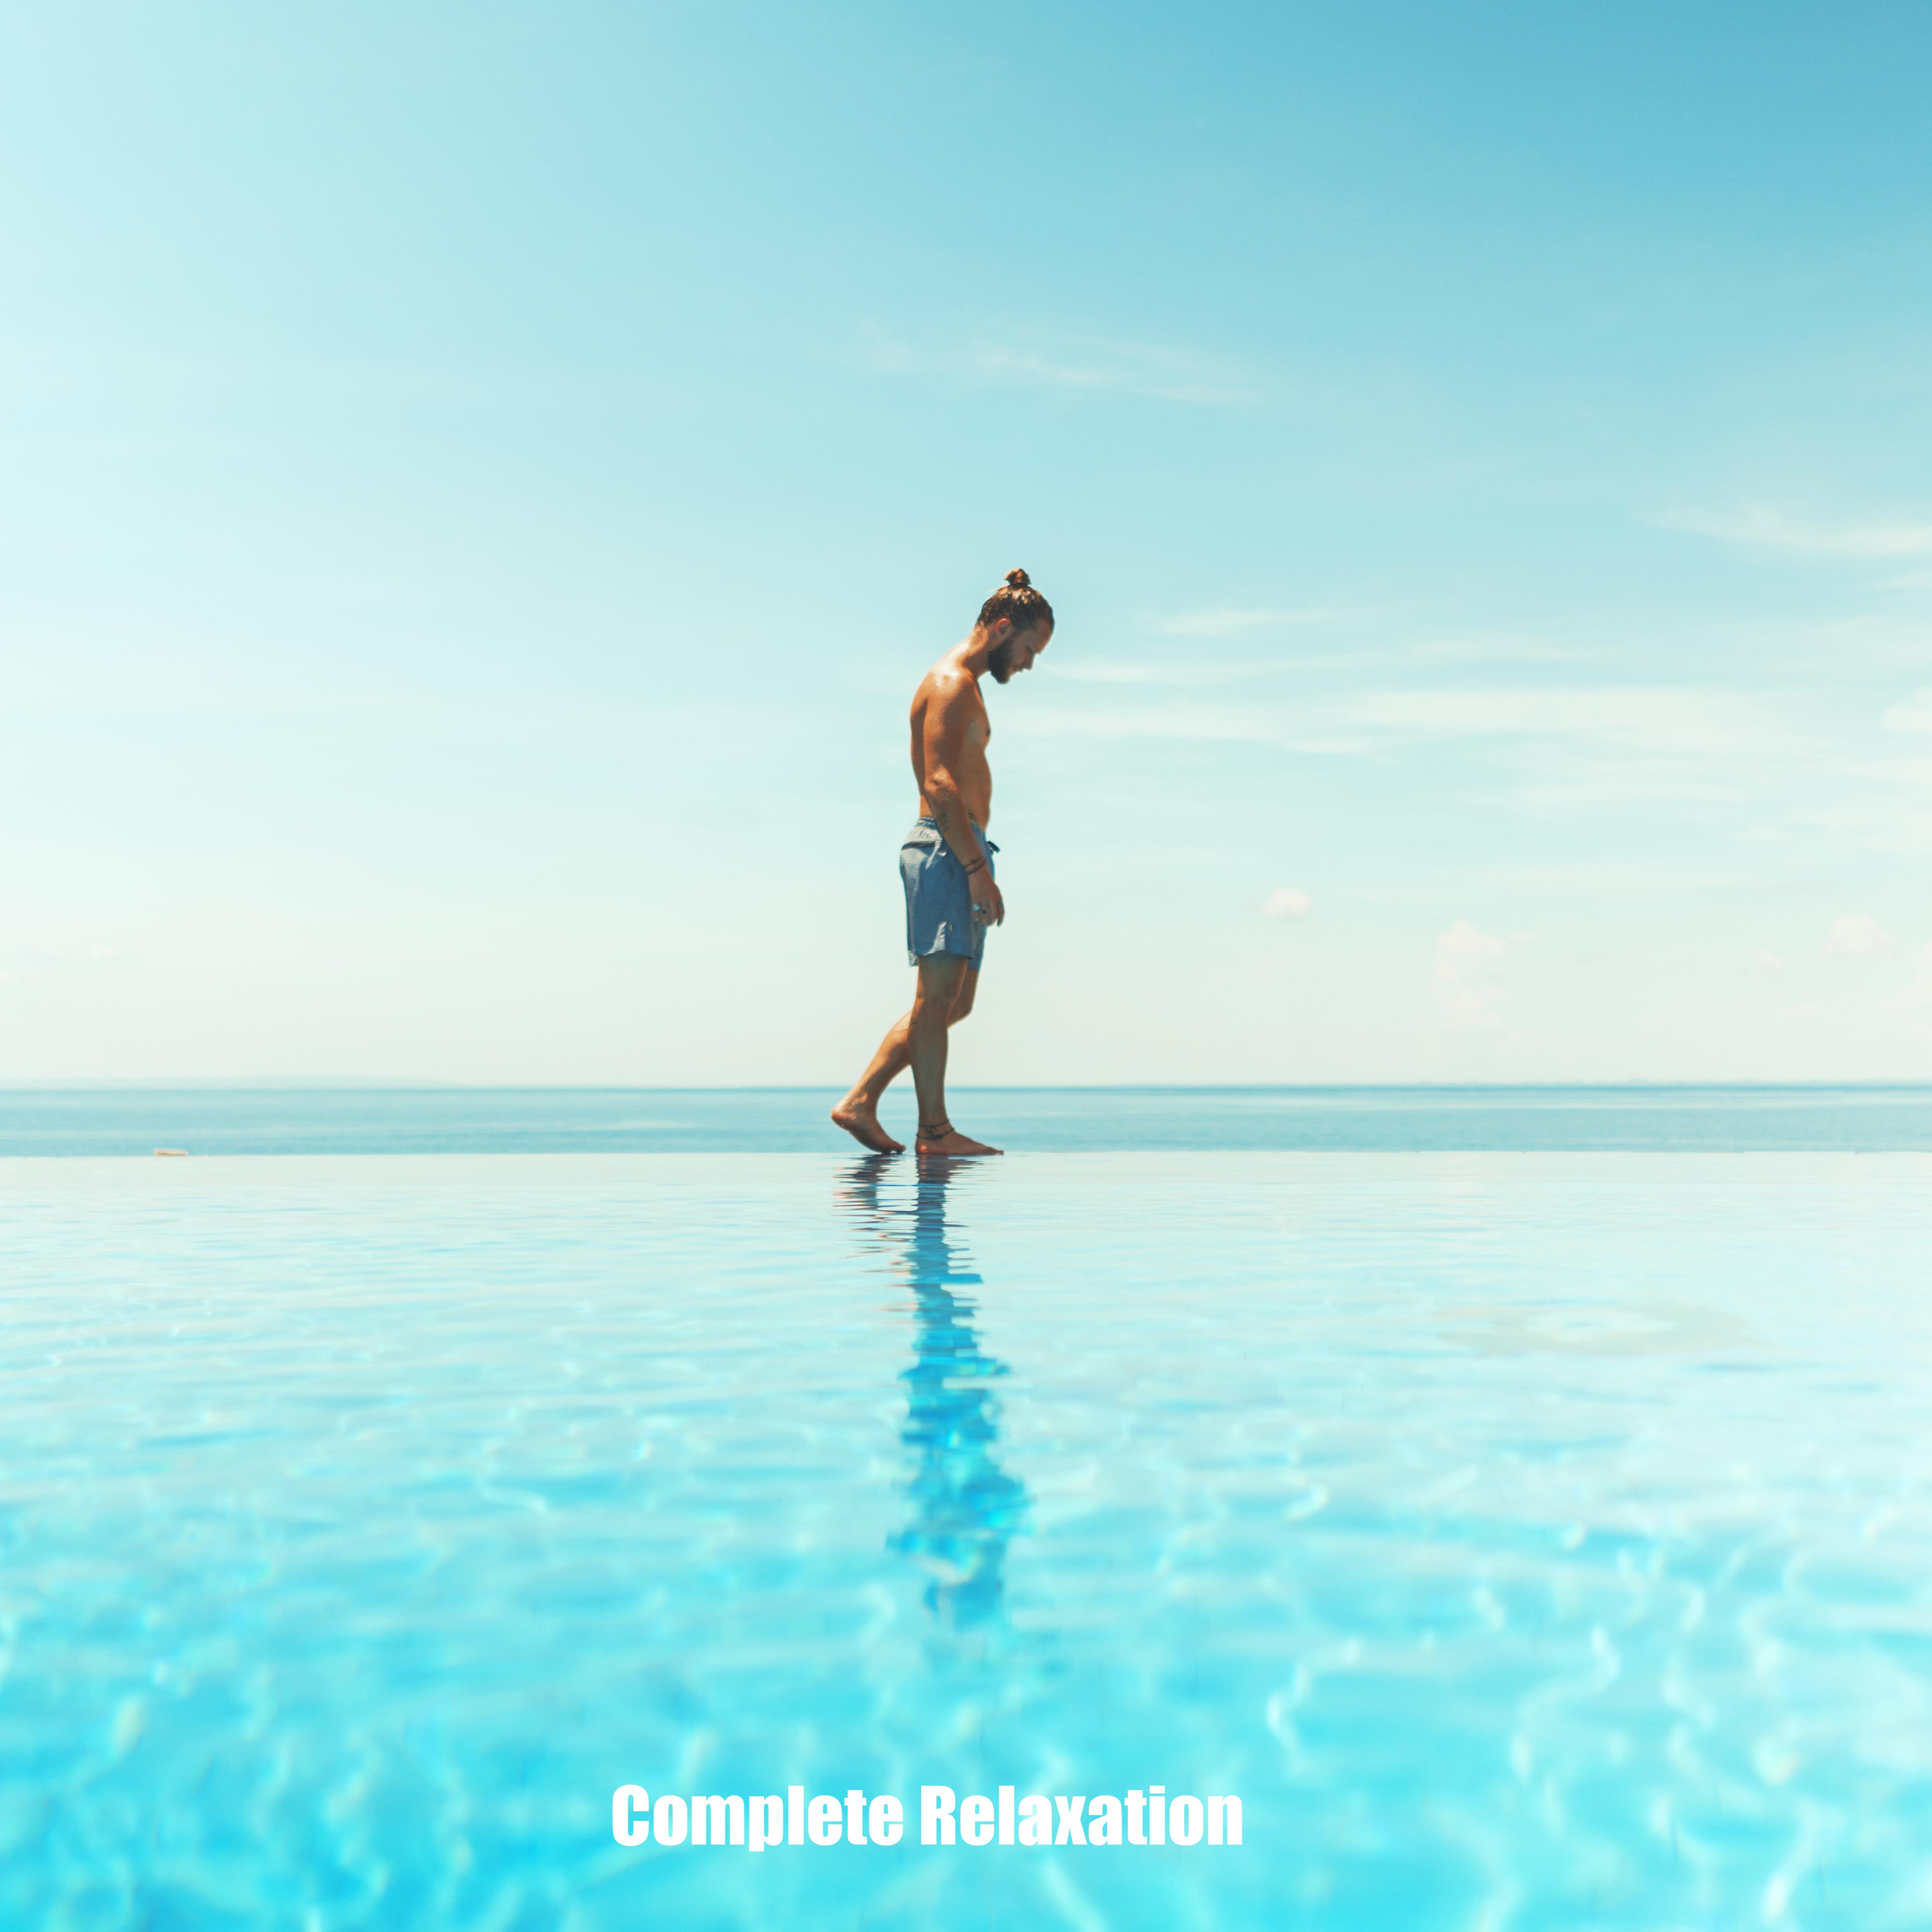 Complete Relaxation: Ibiza Chillout, Lounge, Music Zone, Ambient Chill, Chilled Ibiza, Summer Vibes 2019, Summer Holiday Music